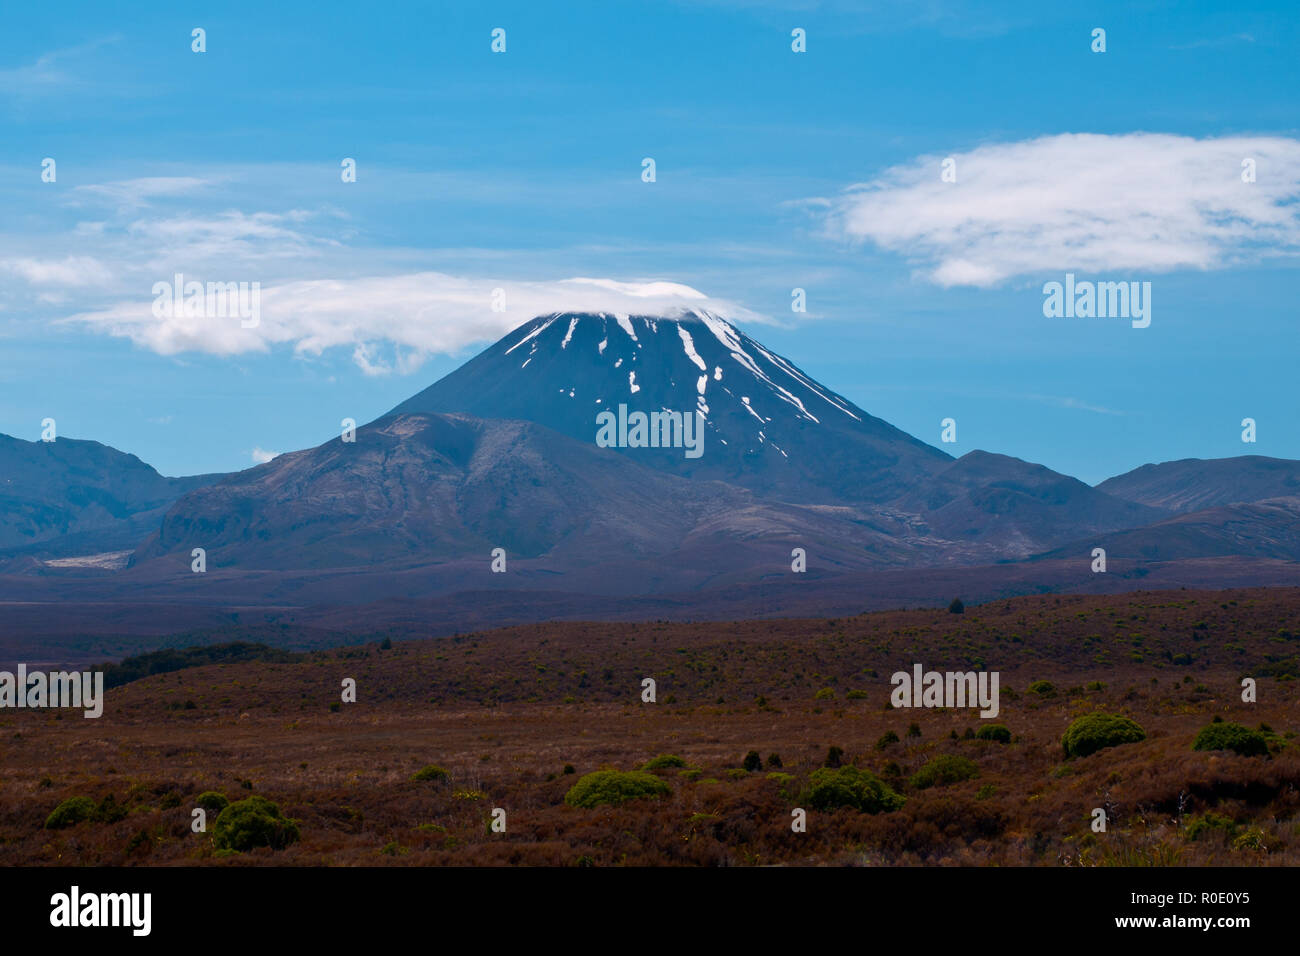 Perfect cone of a sleeping volcano in new zealand Stock Photo